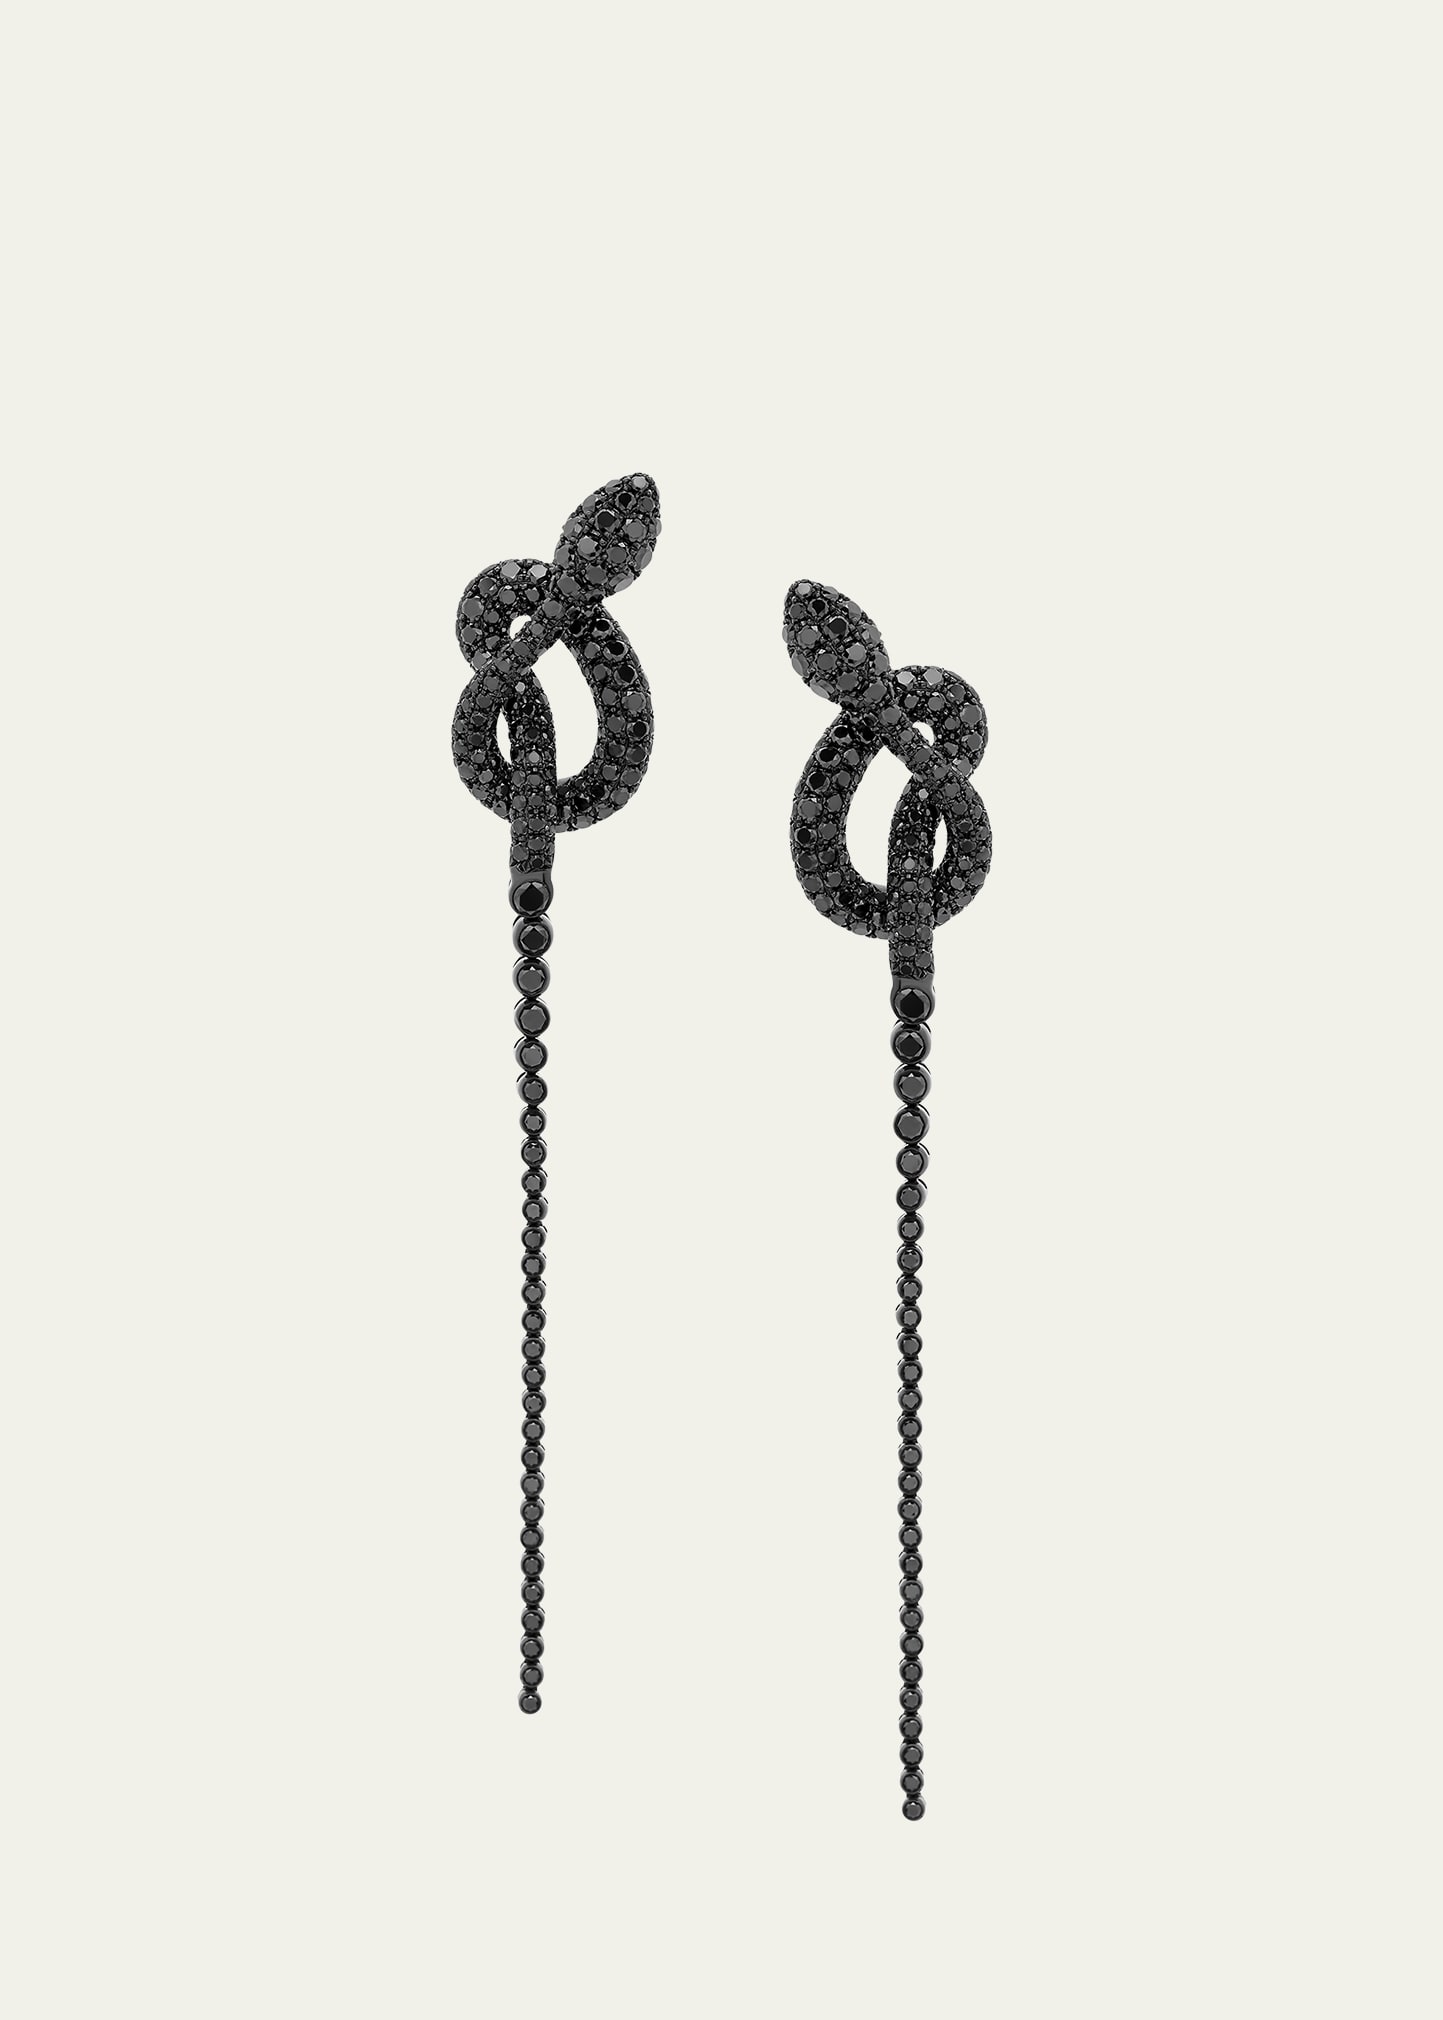 White Gold Black Diamond Earrings from The Snake Collection